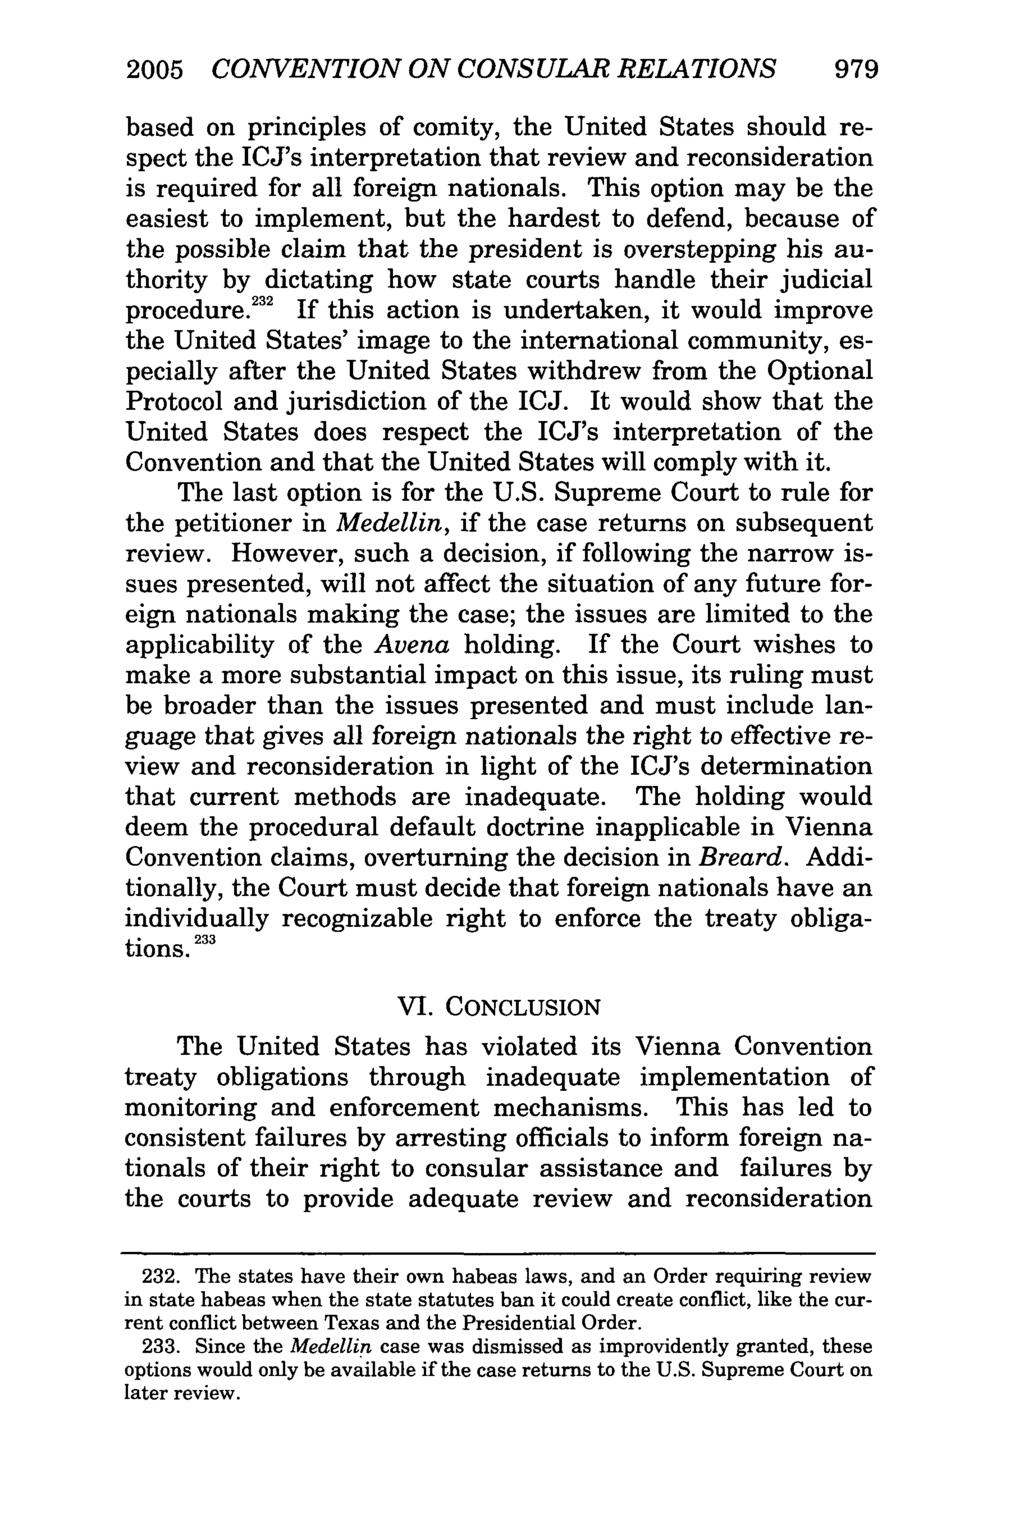 2005 CONVENTION ON CONSULAR RELATIONS 979 based on principles of comity, the United States should respect the ICJ's interpretation that review and reconsideration is required for all foreign